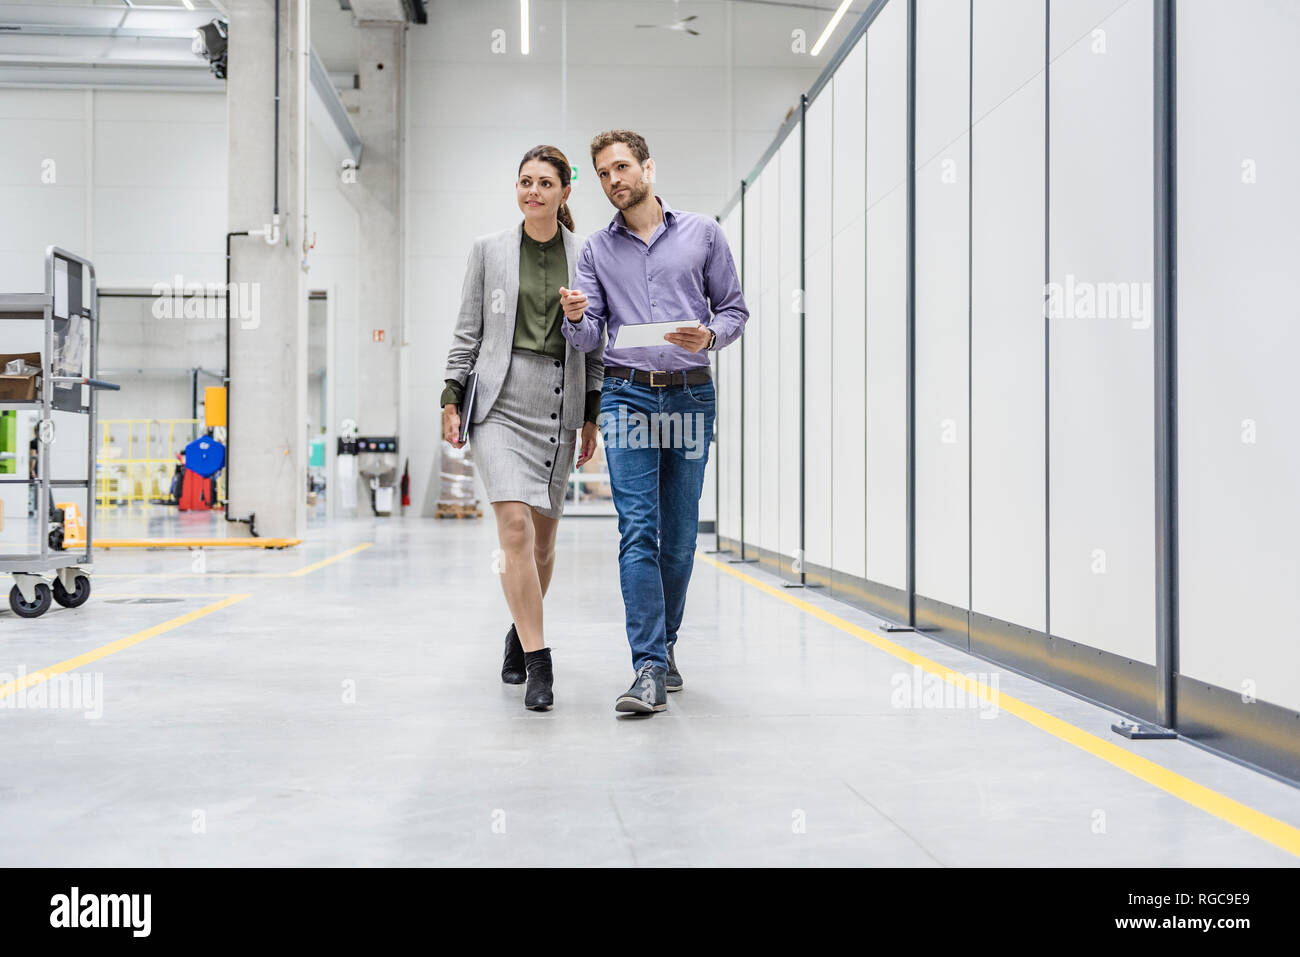 Businessman and woman walking in company, discussing new strategies Stock Photo